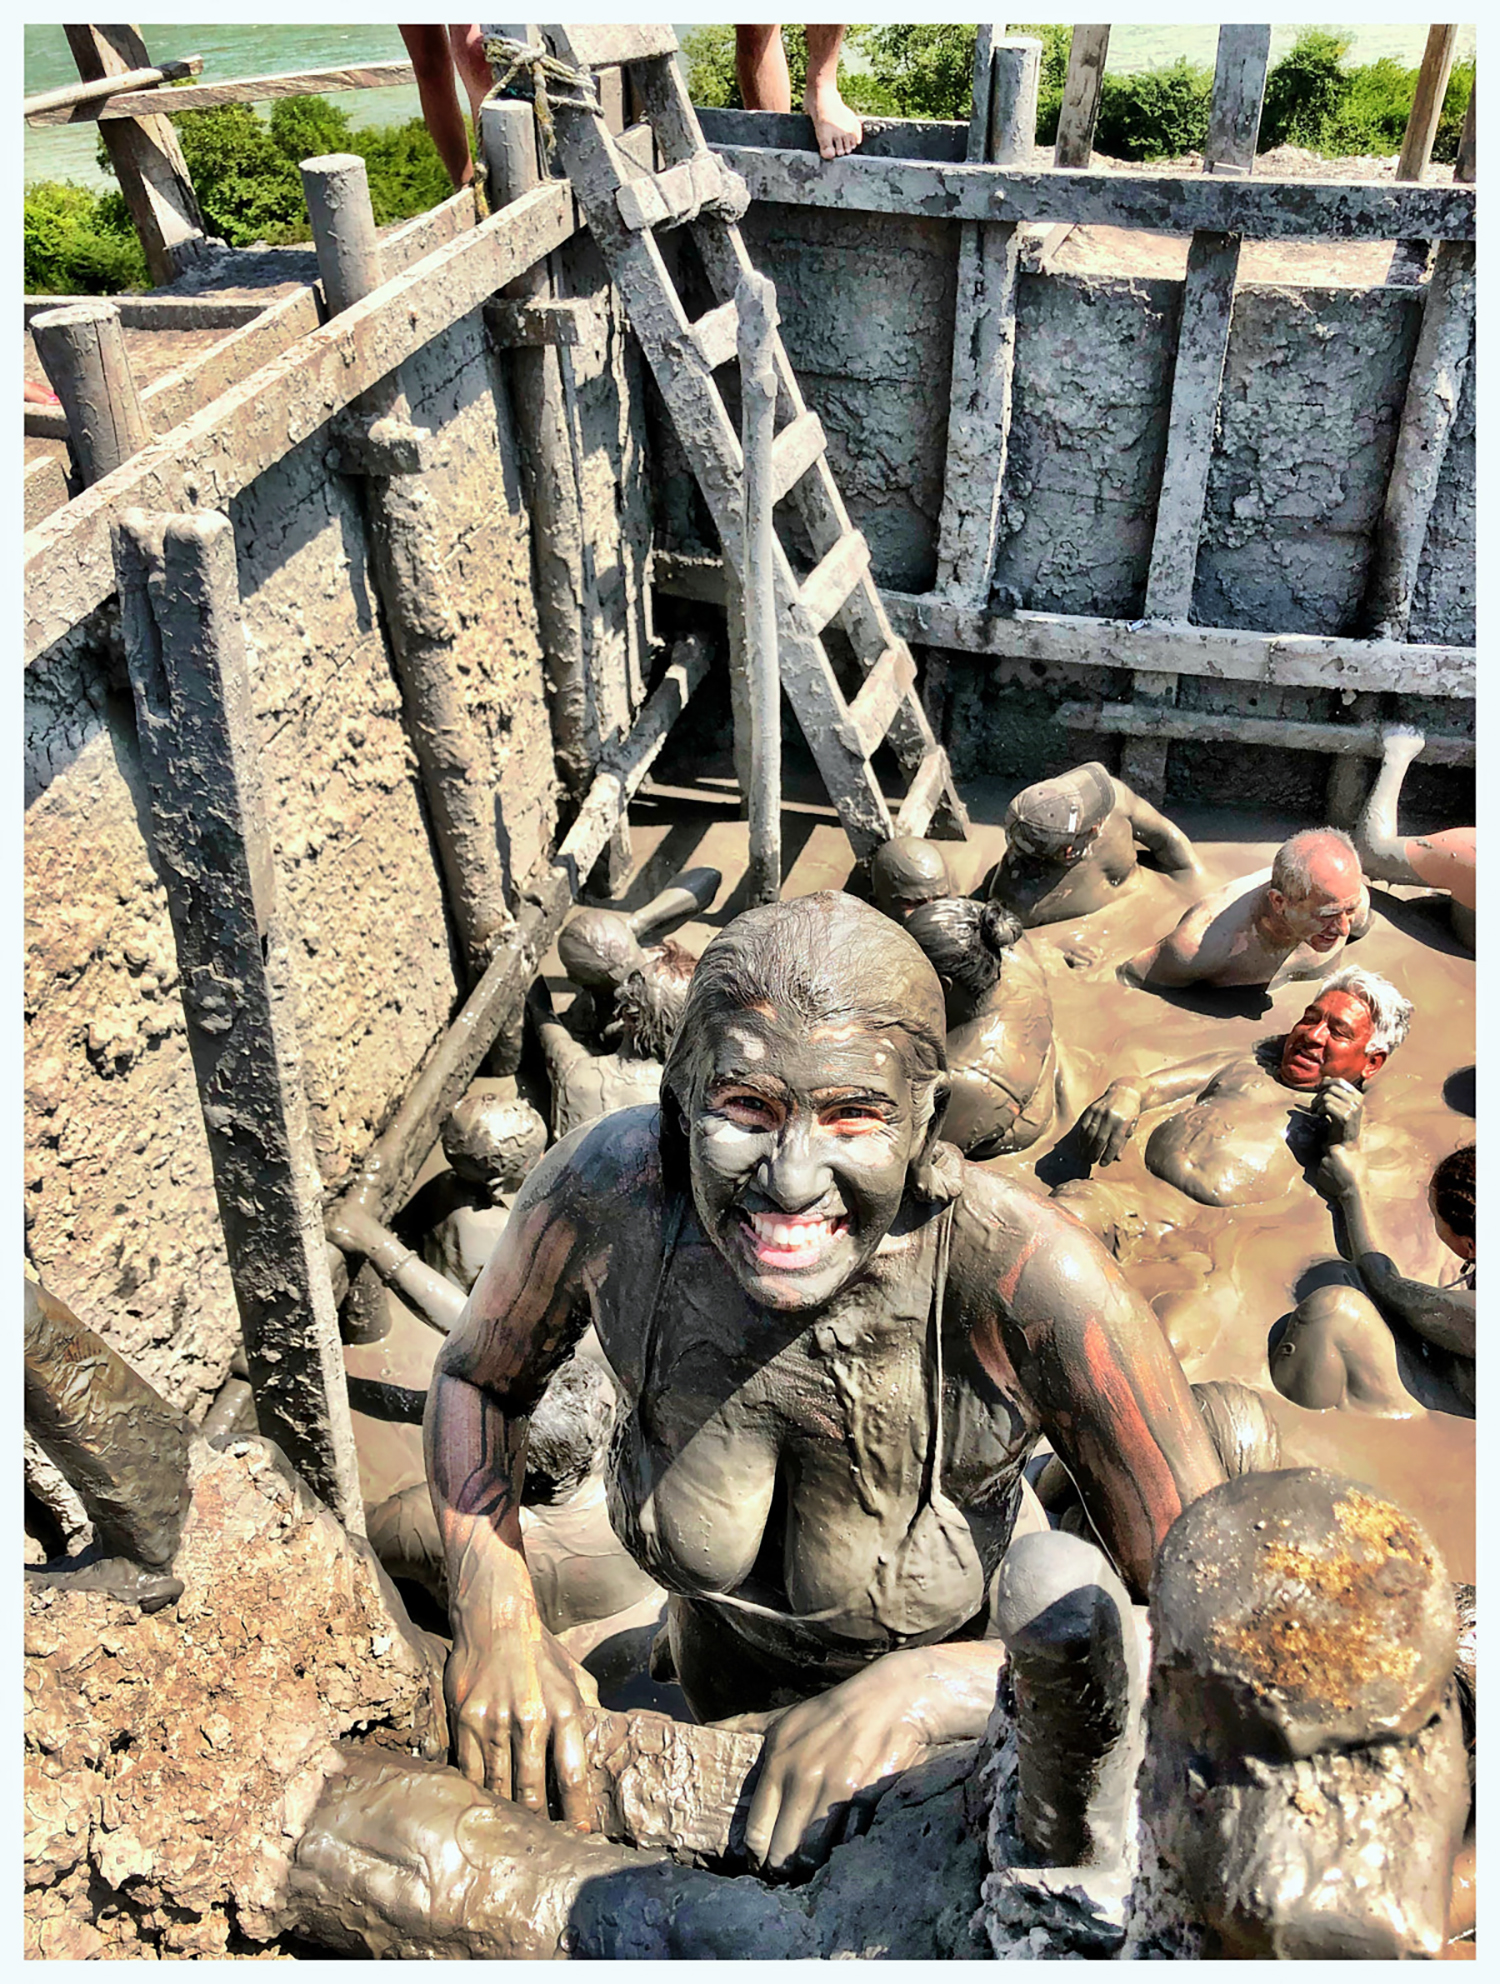 A woman in a bathing suit covered in mud climbing a latter